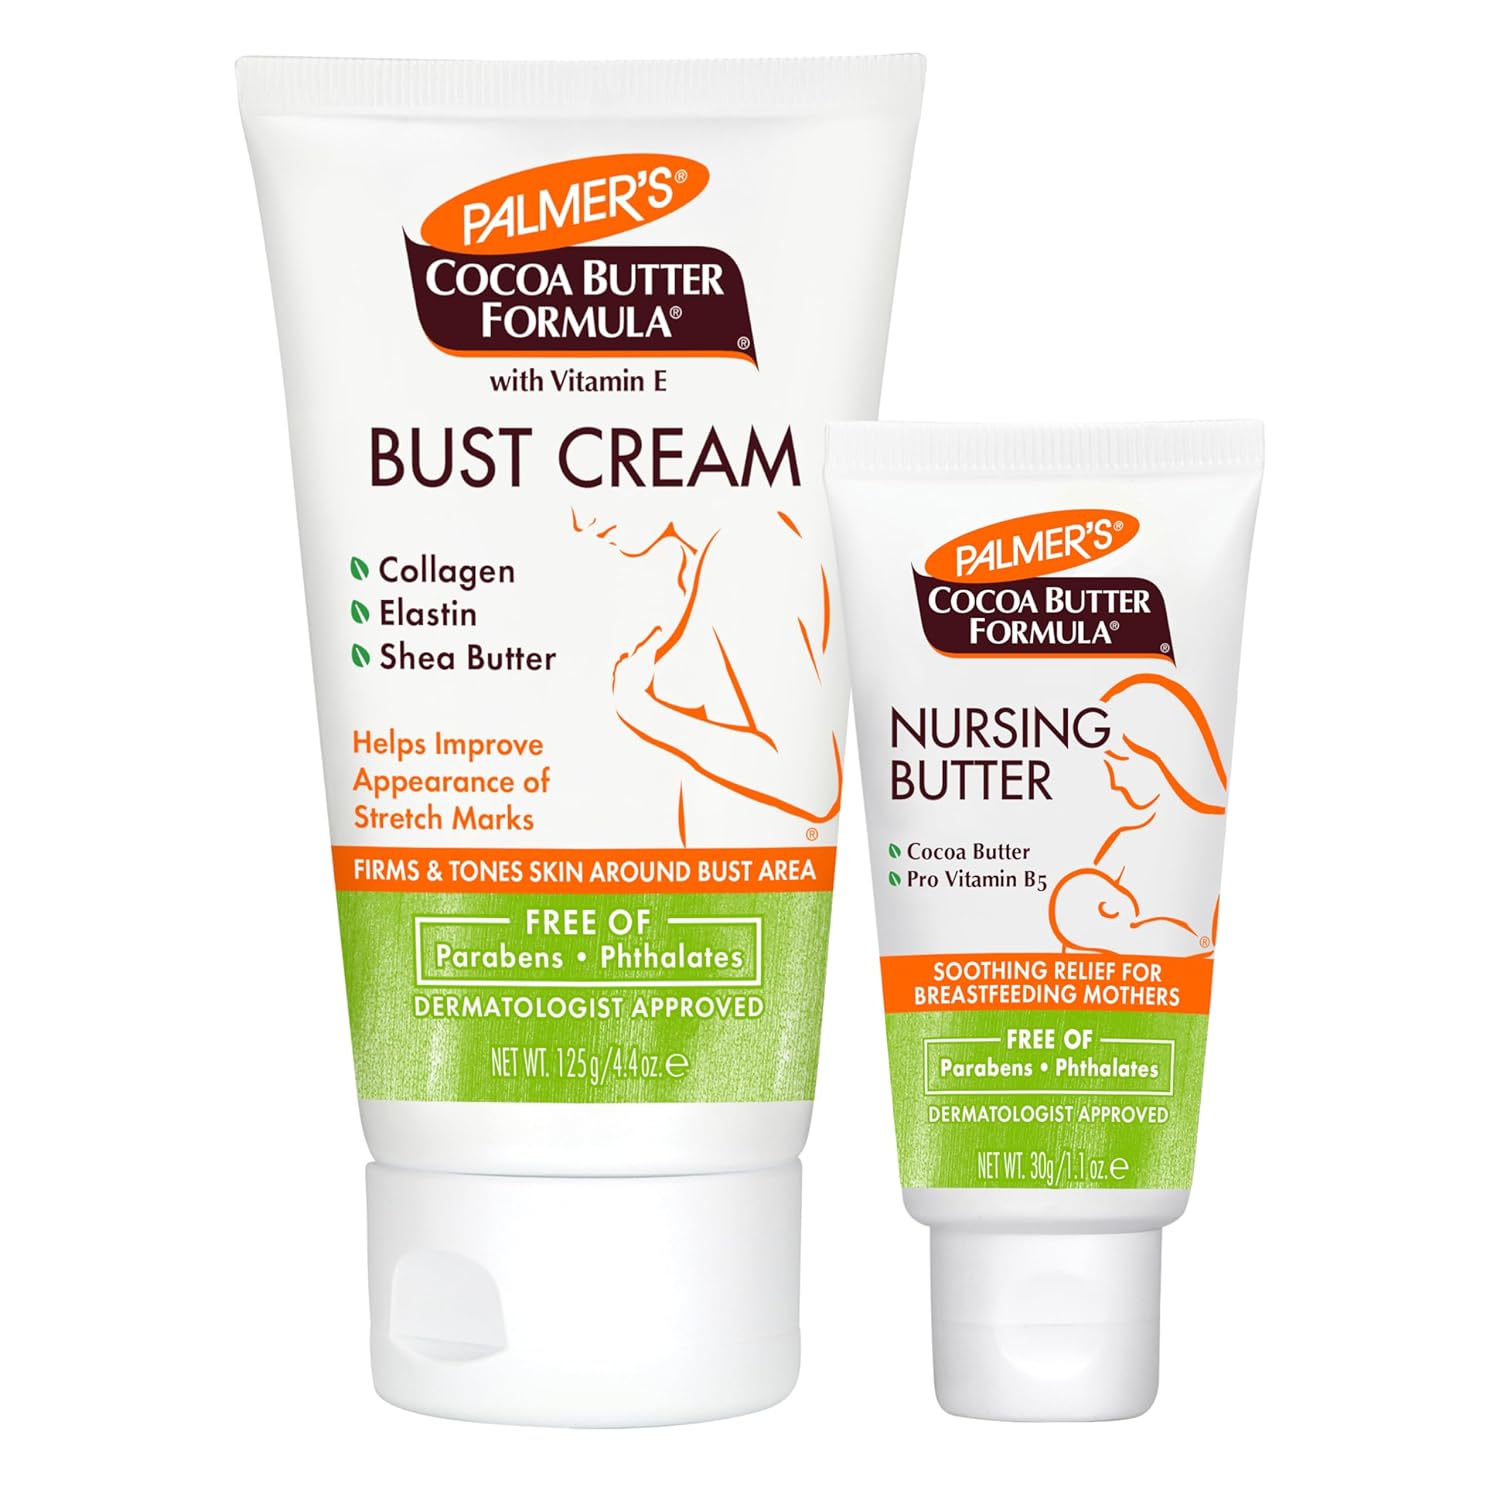 Palmer's Nursing Butter & Bust Cream bundle (Pack of 2) : Beauty & Personal Care